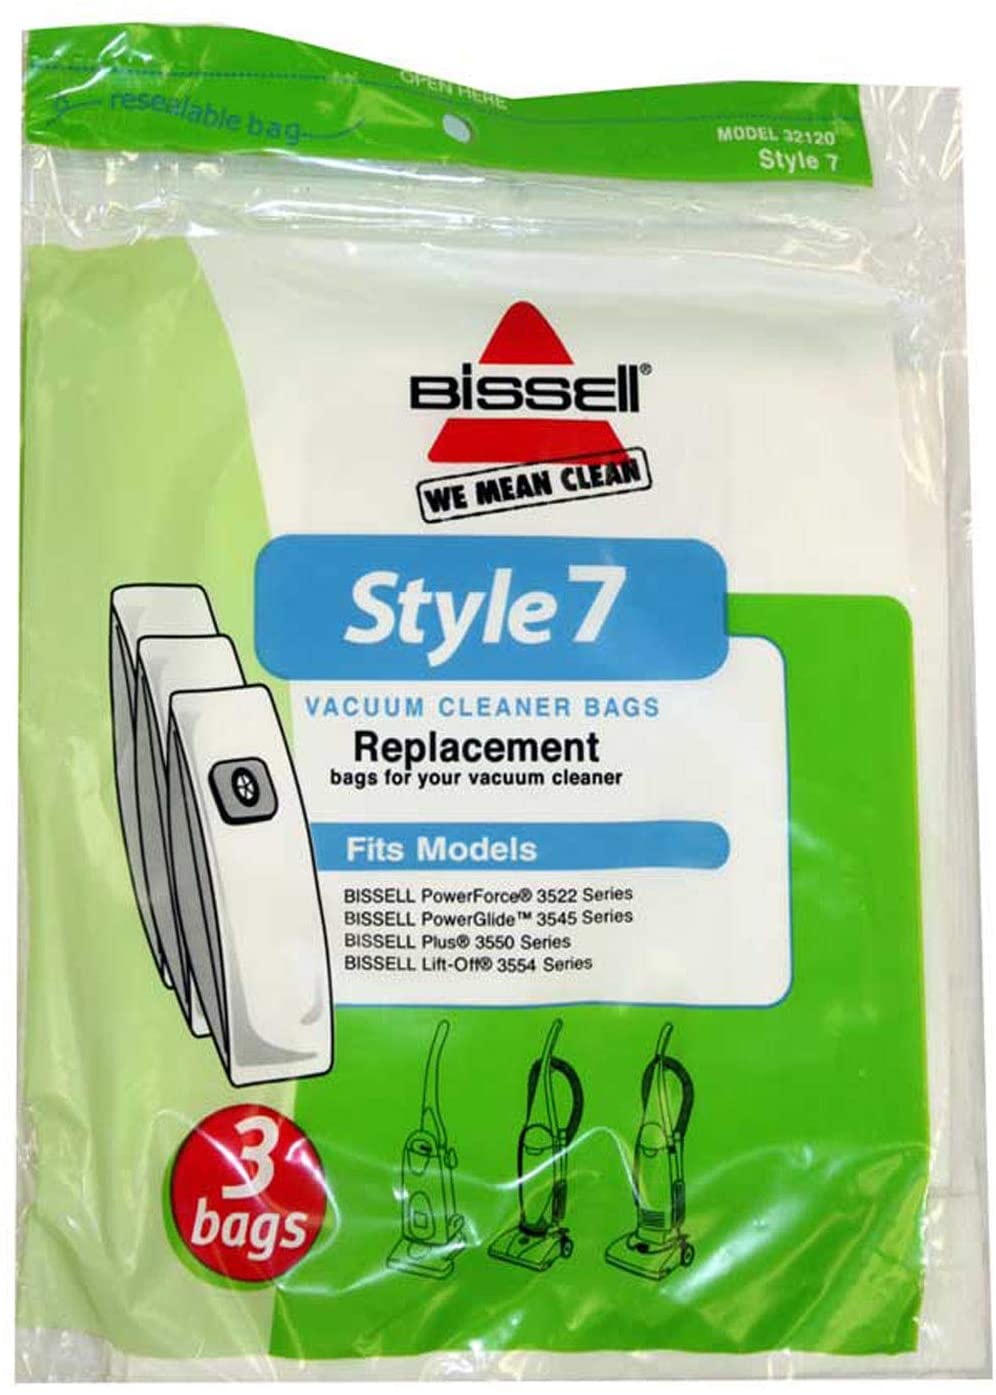 Bissell Style 7 Vacuum Cleaner Bags 3/pack